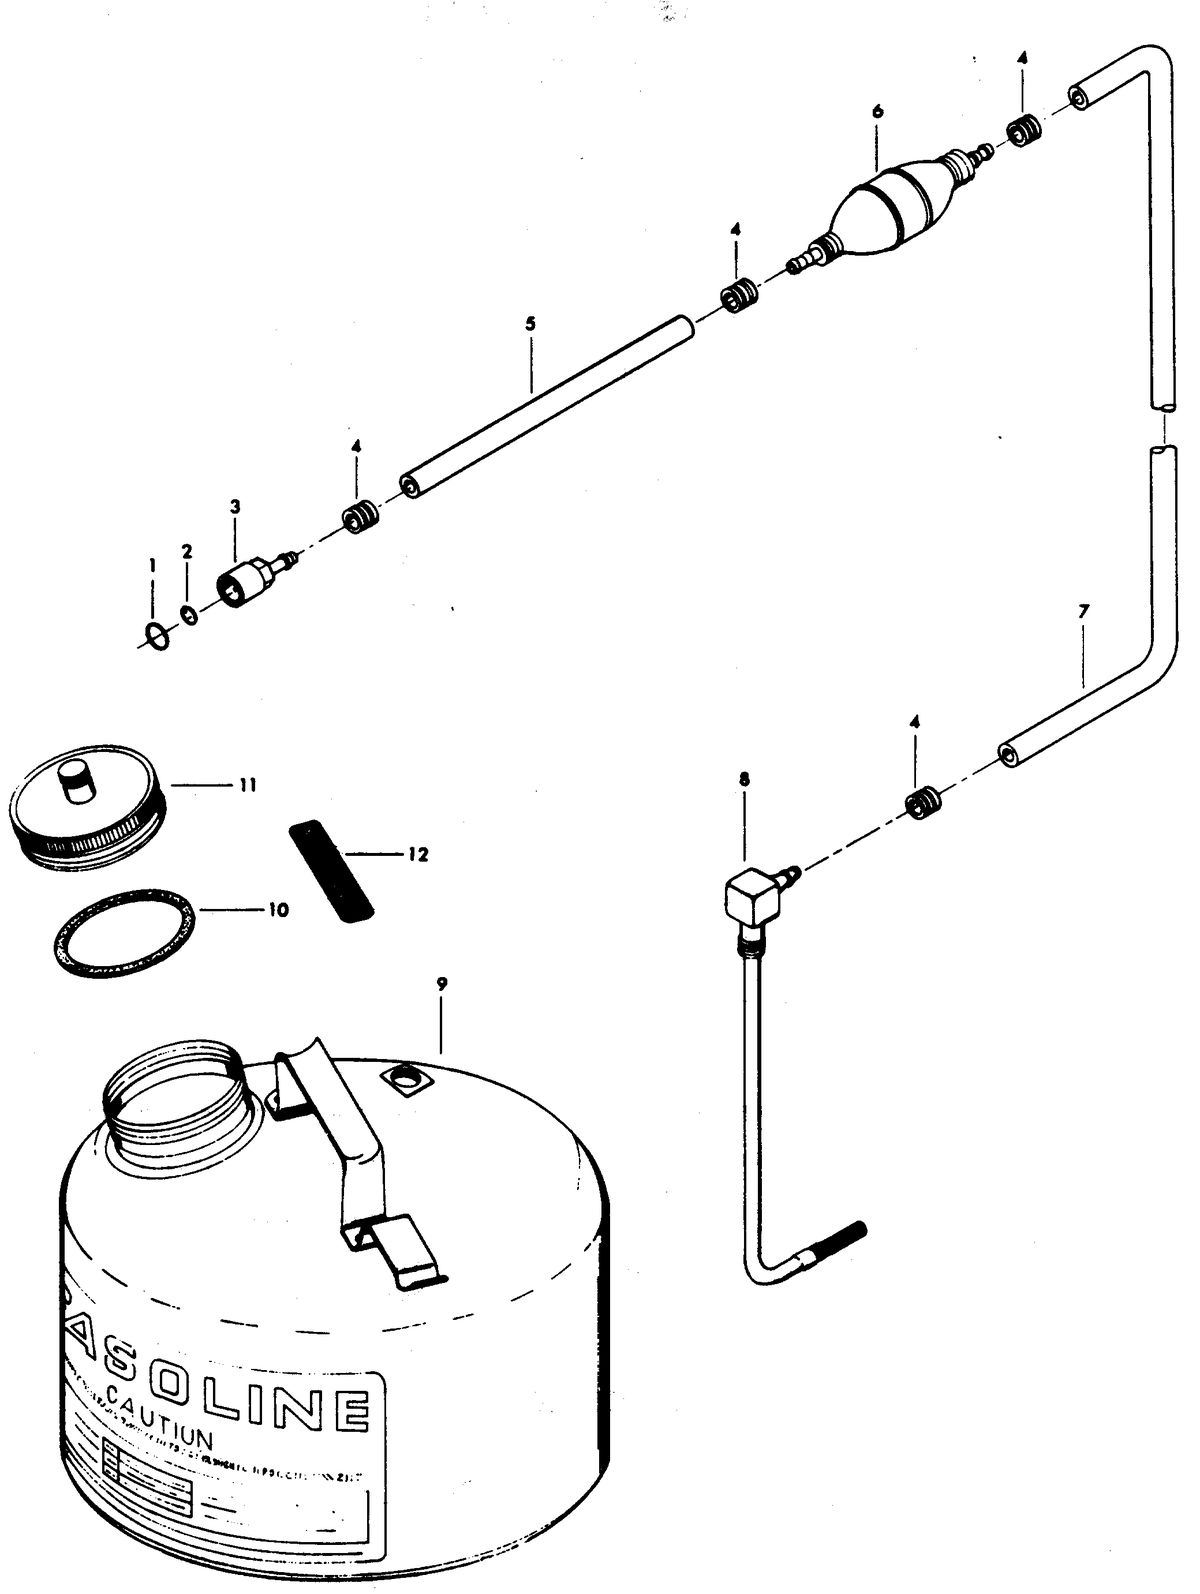 CHRYSLER 6 H.P. EXPORT FUEL TANK AND LINE